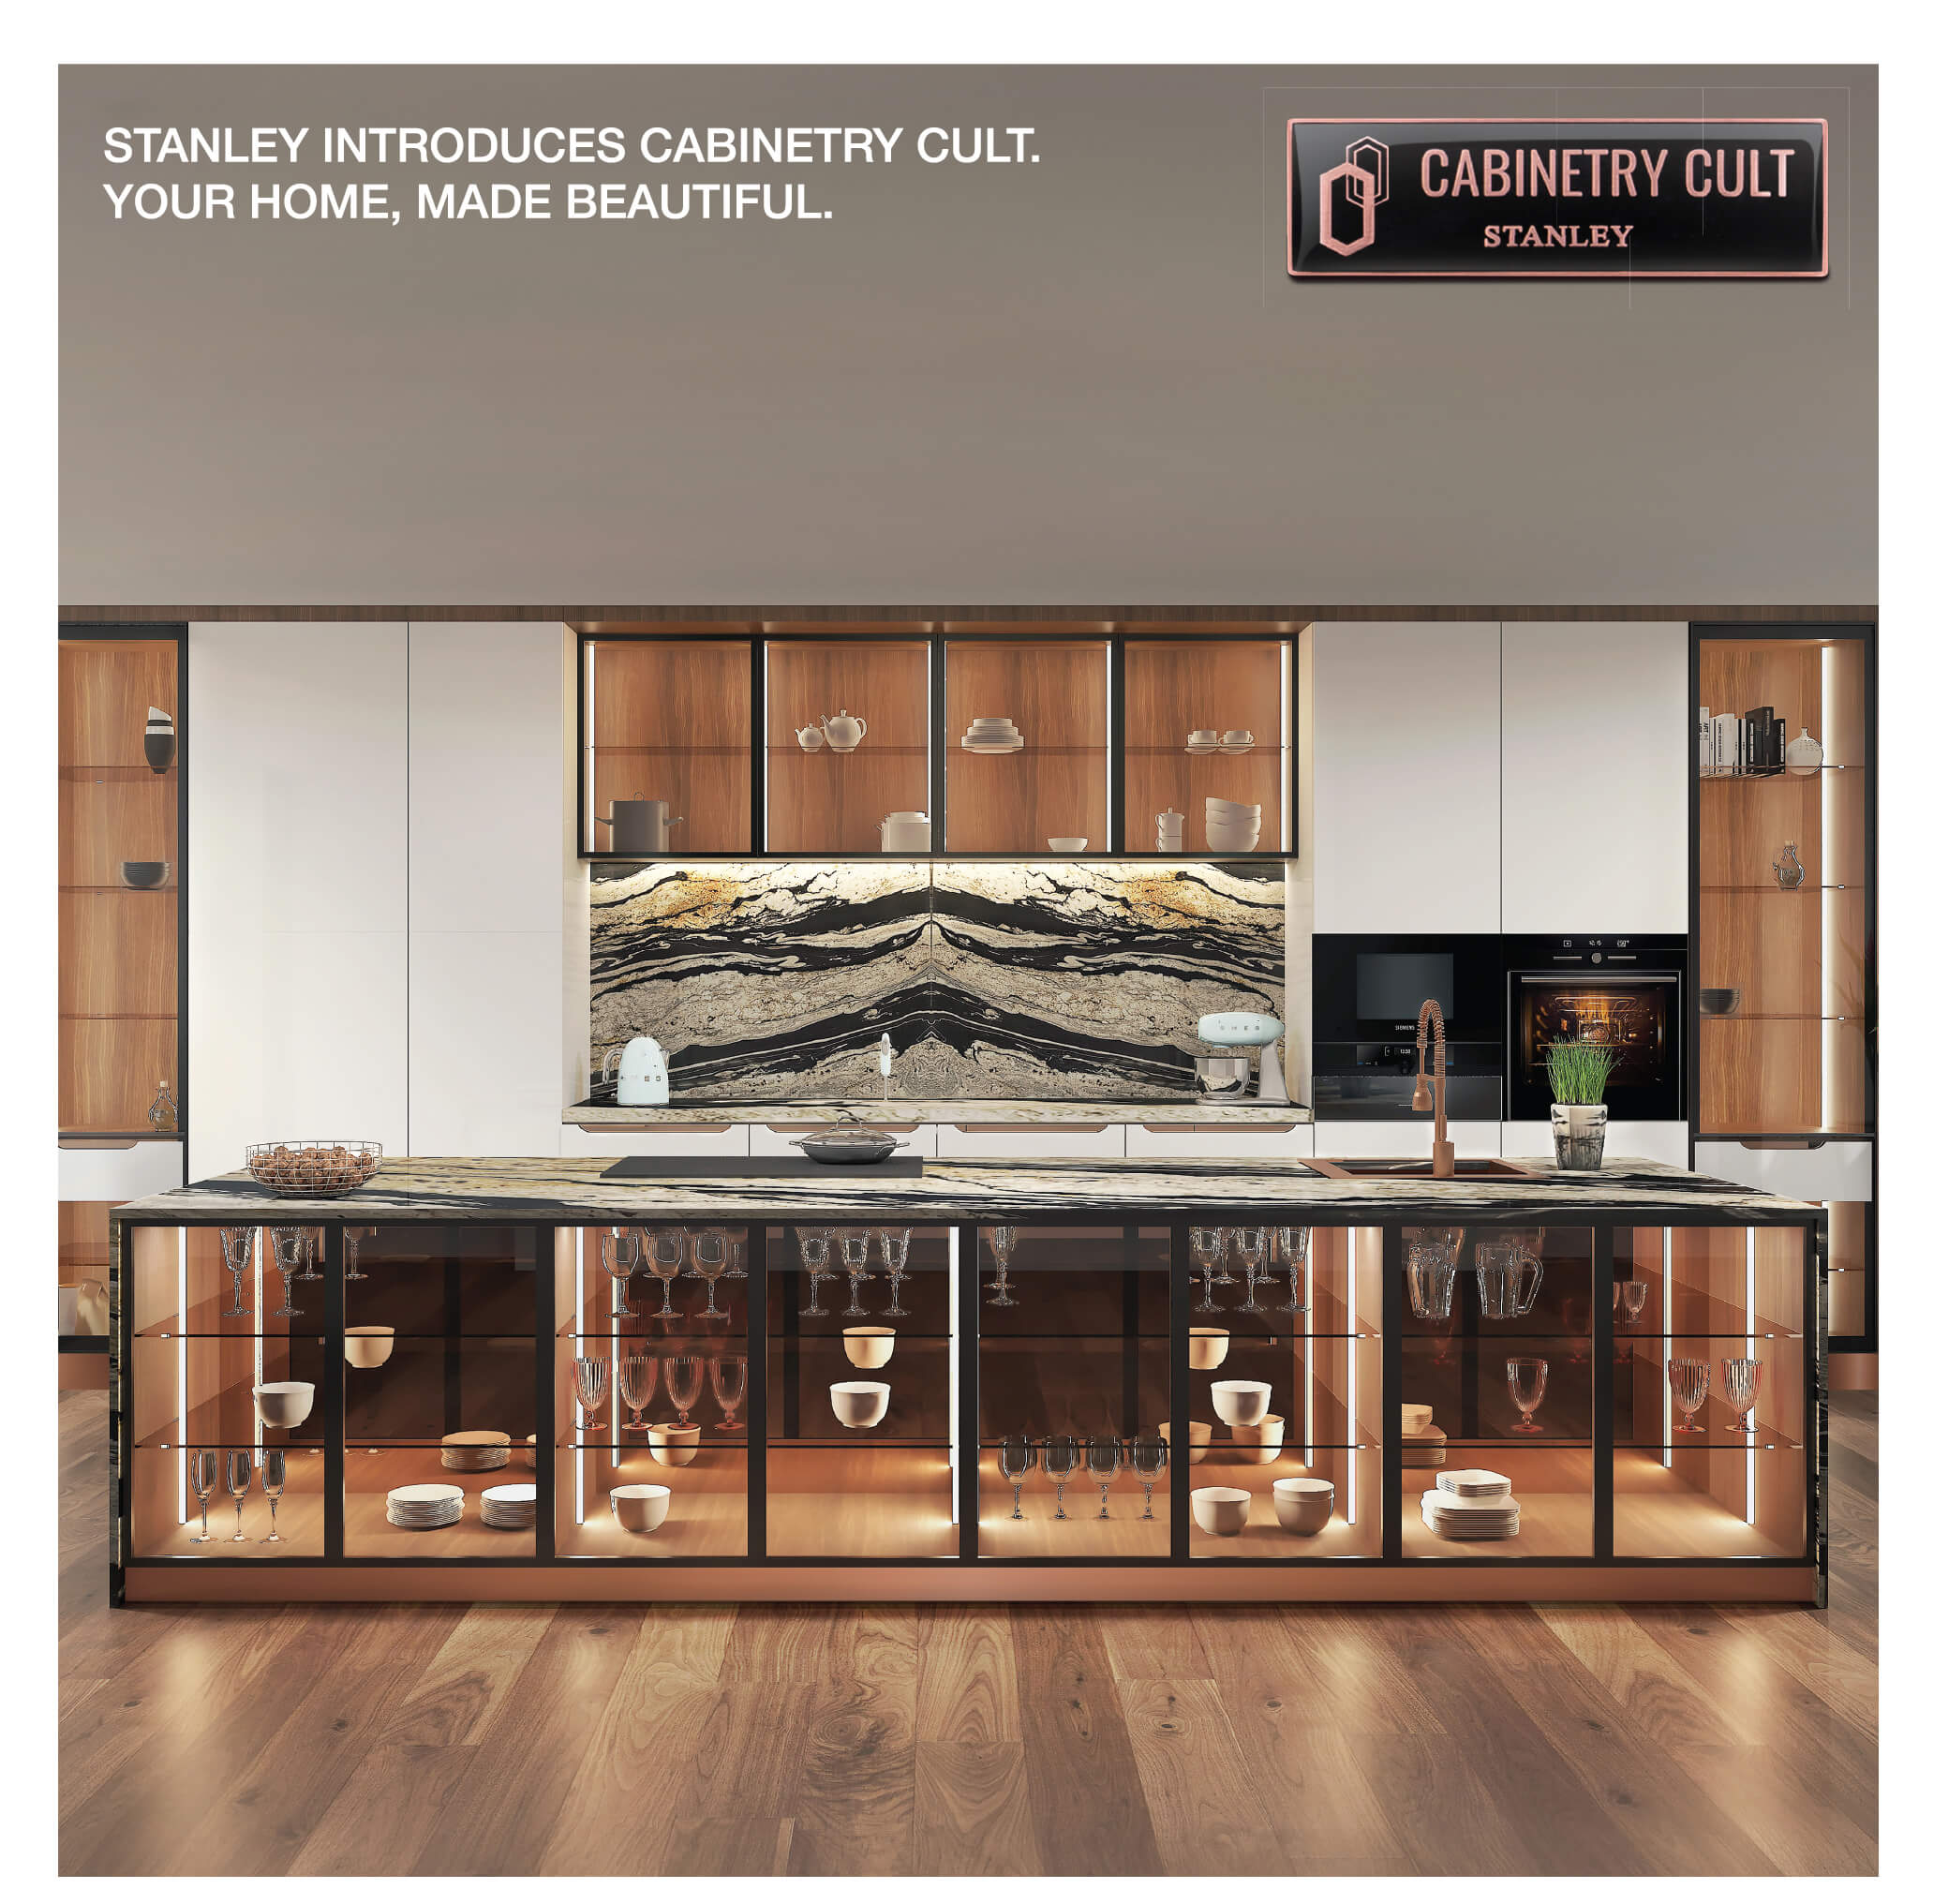 Cabinetry Cult by Stanley